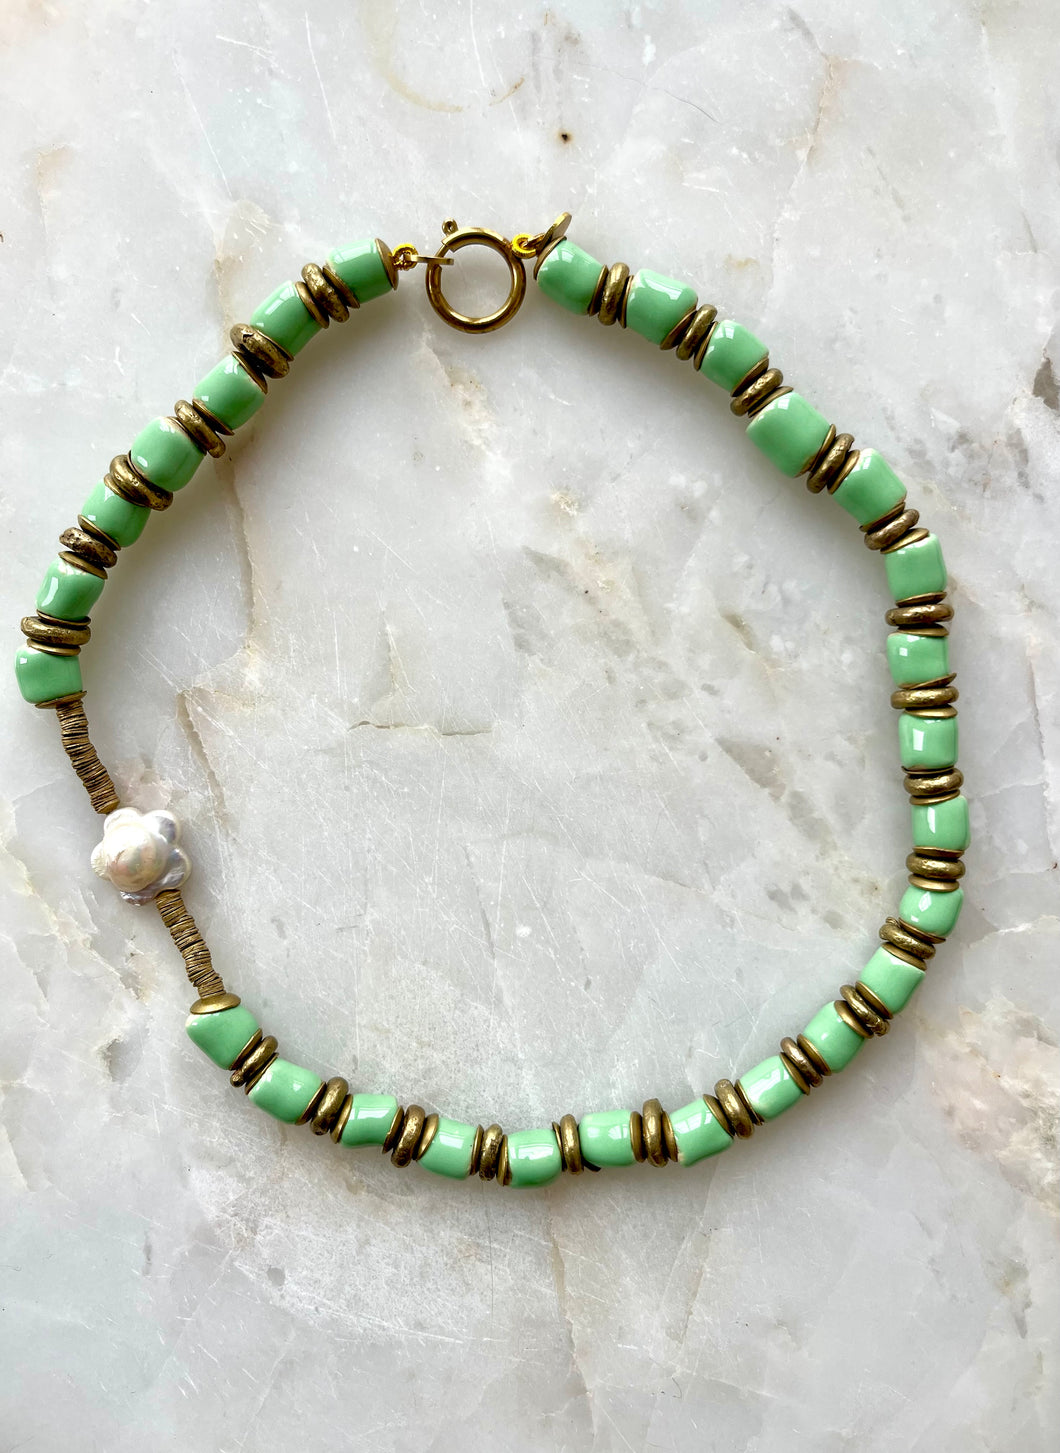 The Mint Ceramic Candy necklace